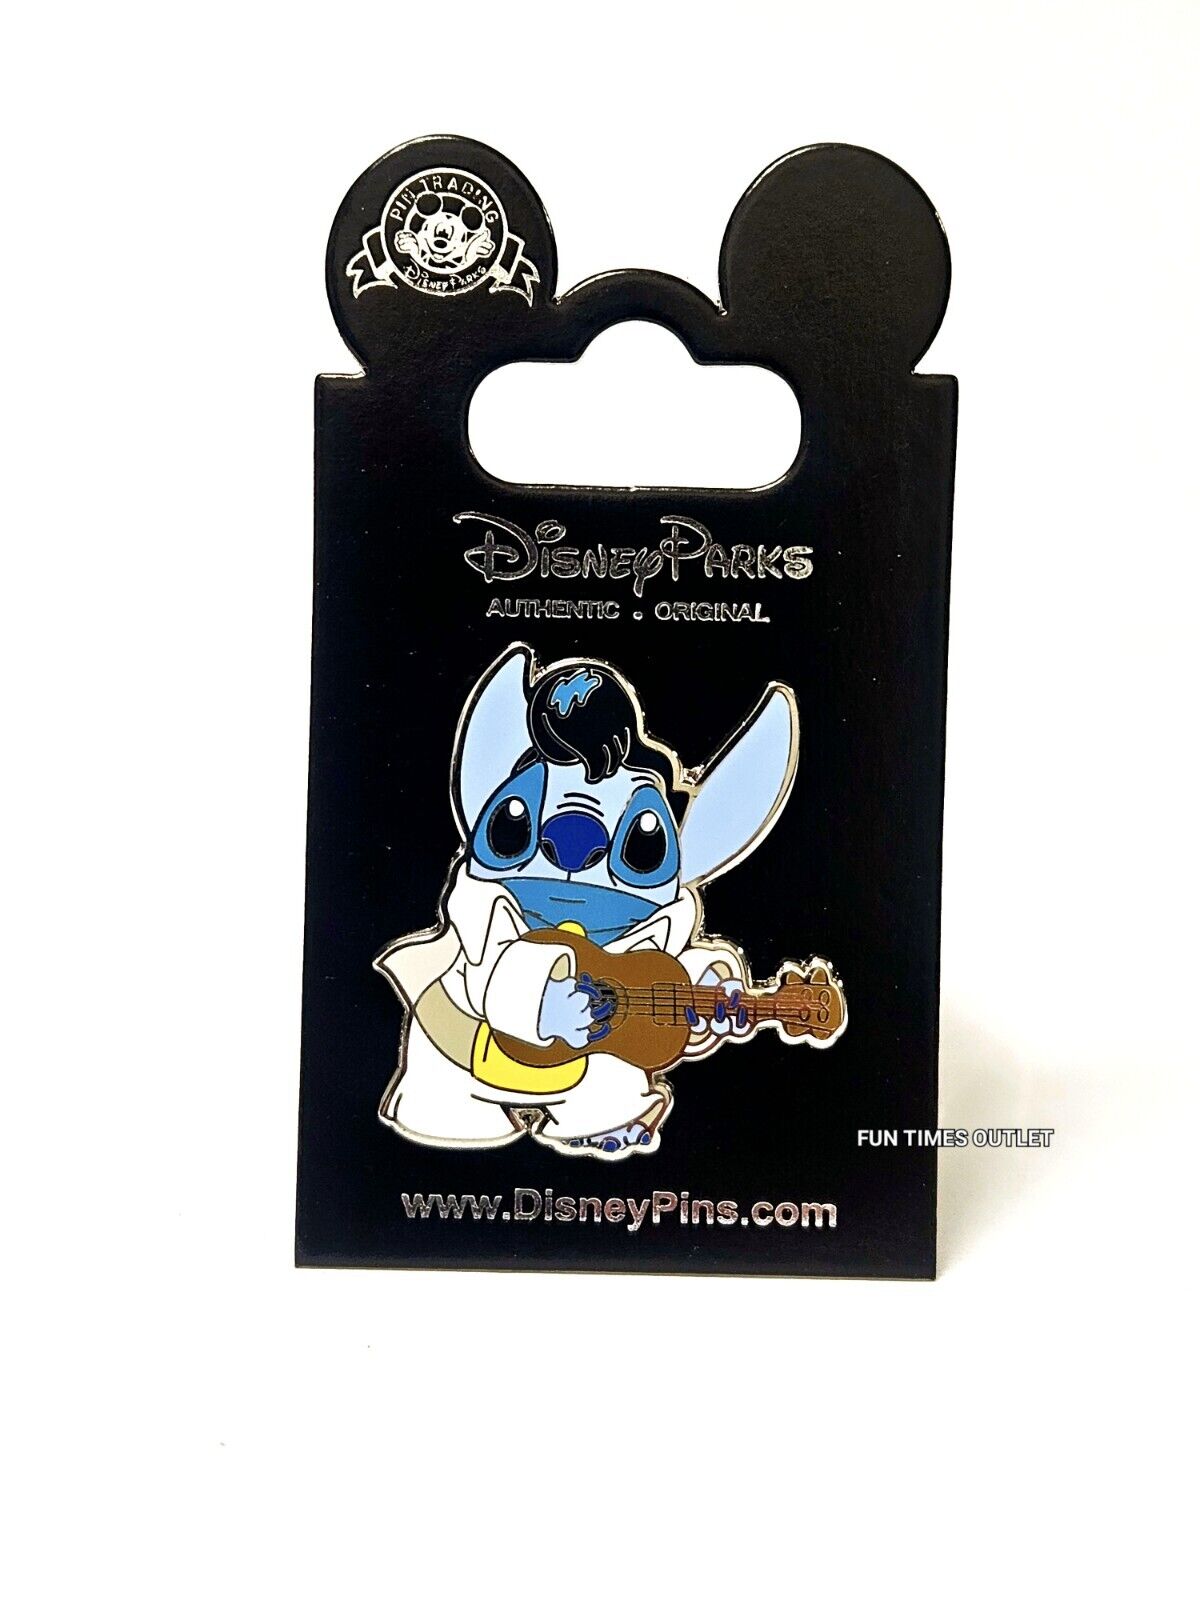 Disney Parks Lilo & Stitch As Elvis Presley Pin Trading Collectible Licensed New